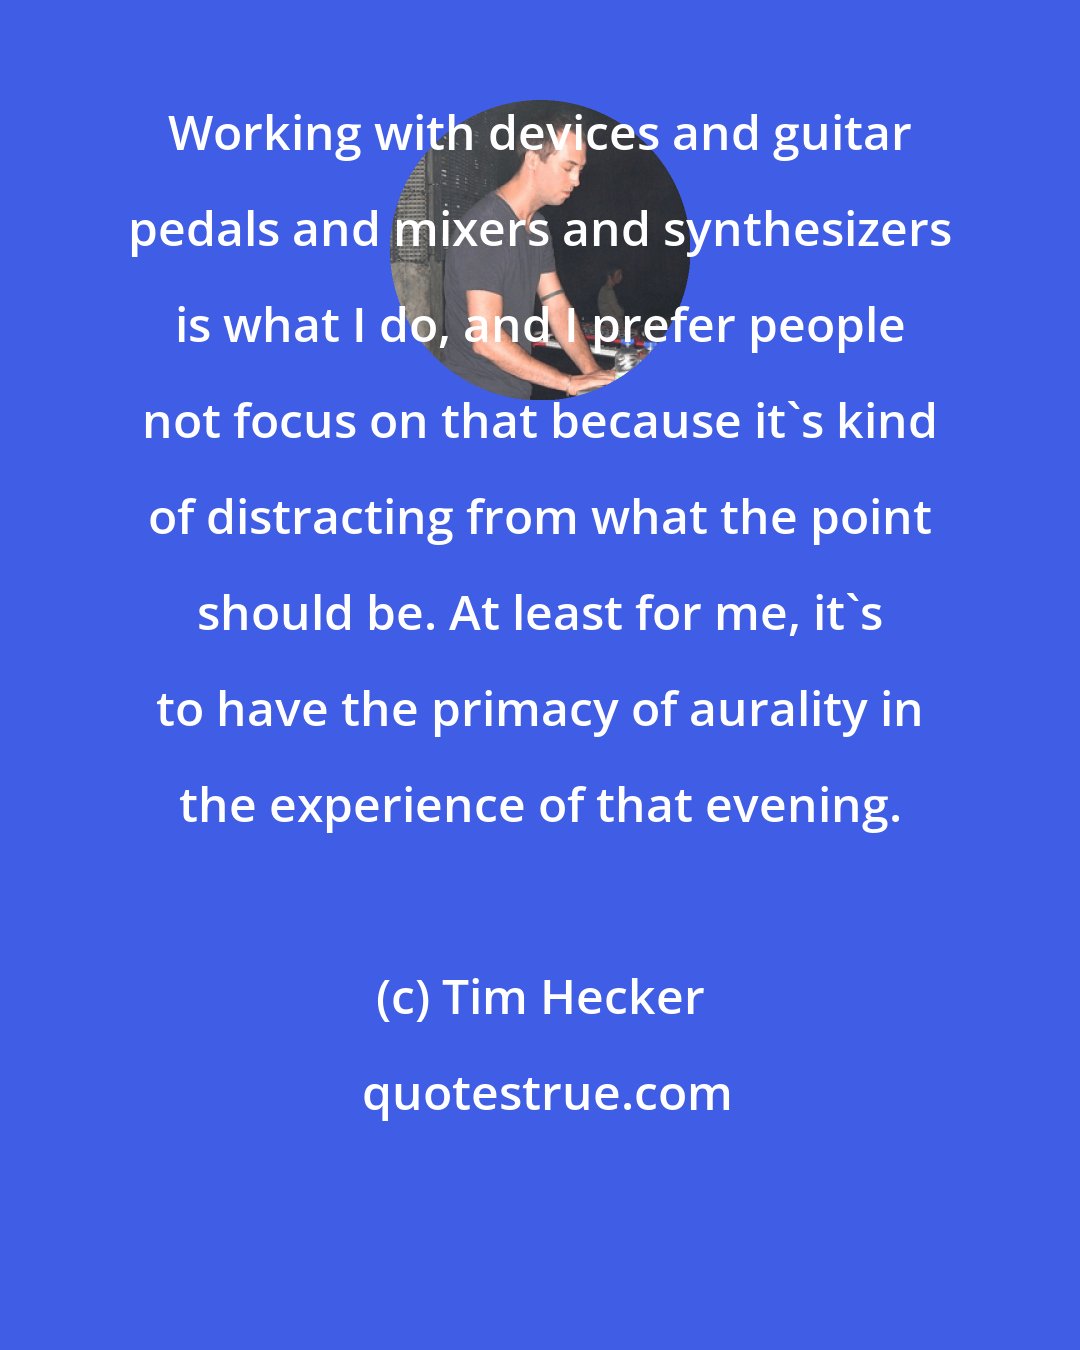 Tim Hecker: Working with devices and guitar pedals and mixers and synthesizers is what I do, and I prefer people not focus on that because it's kind of distracting from what the point should be. At least for me, it's to have the primacy of aurality in the experience of that evening.